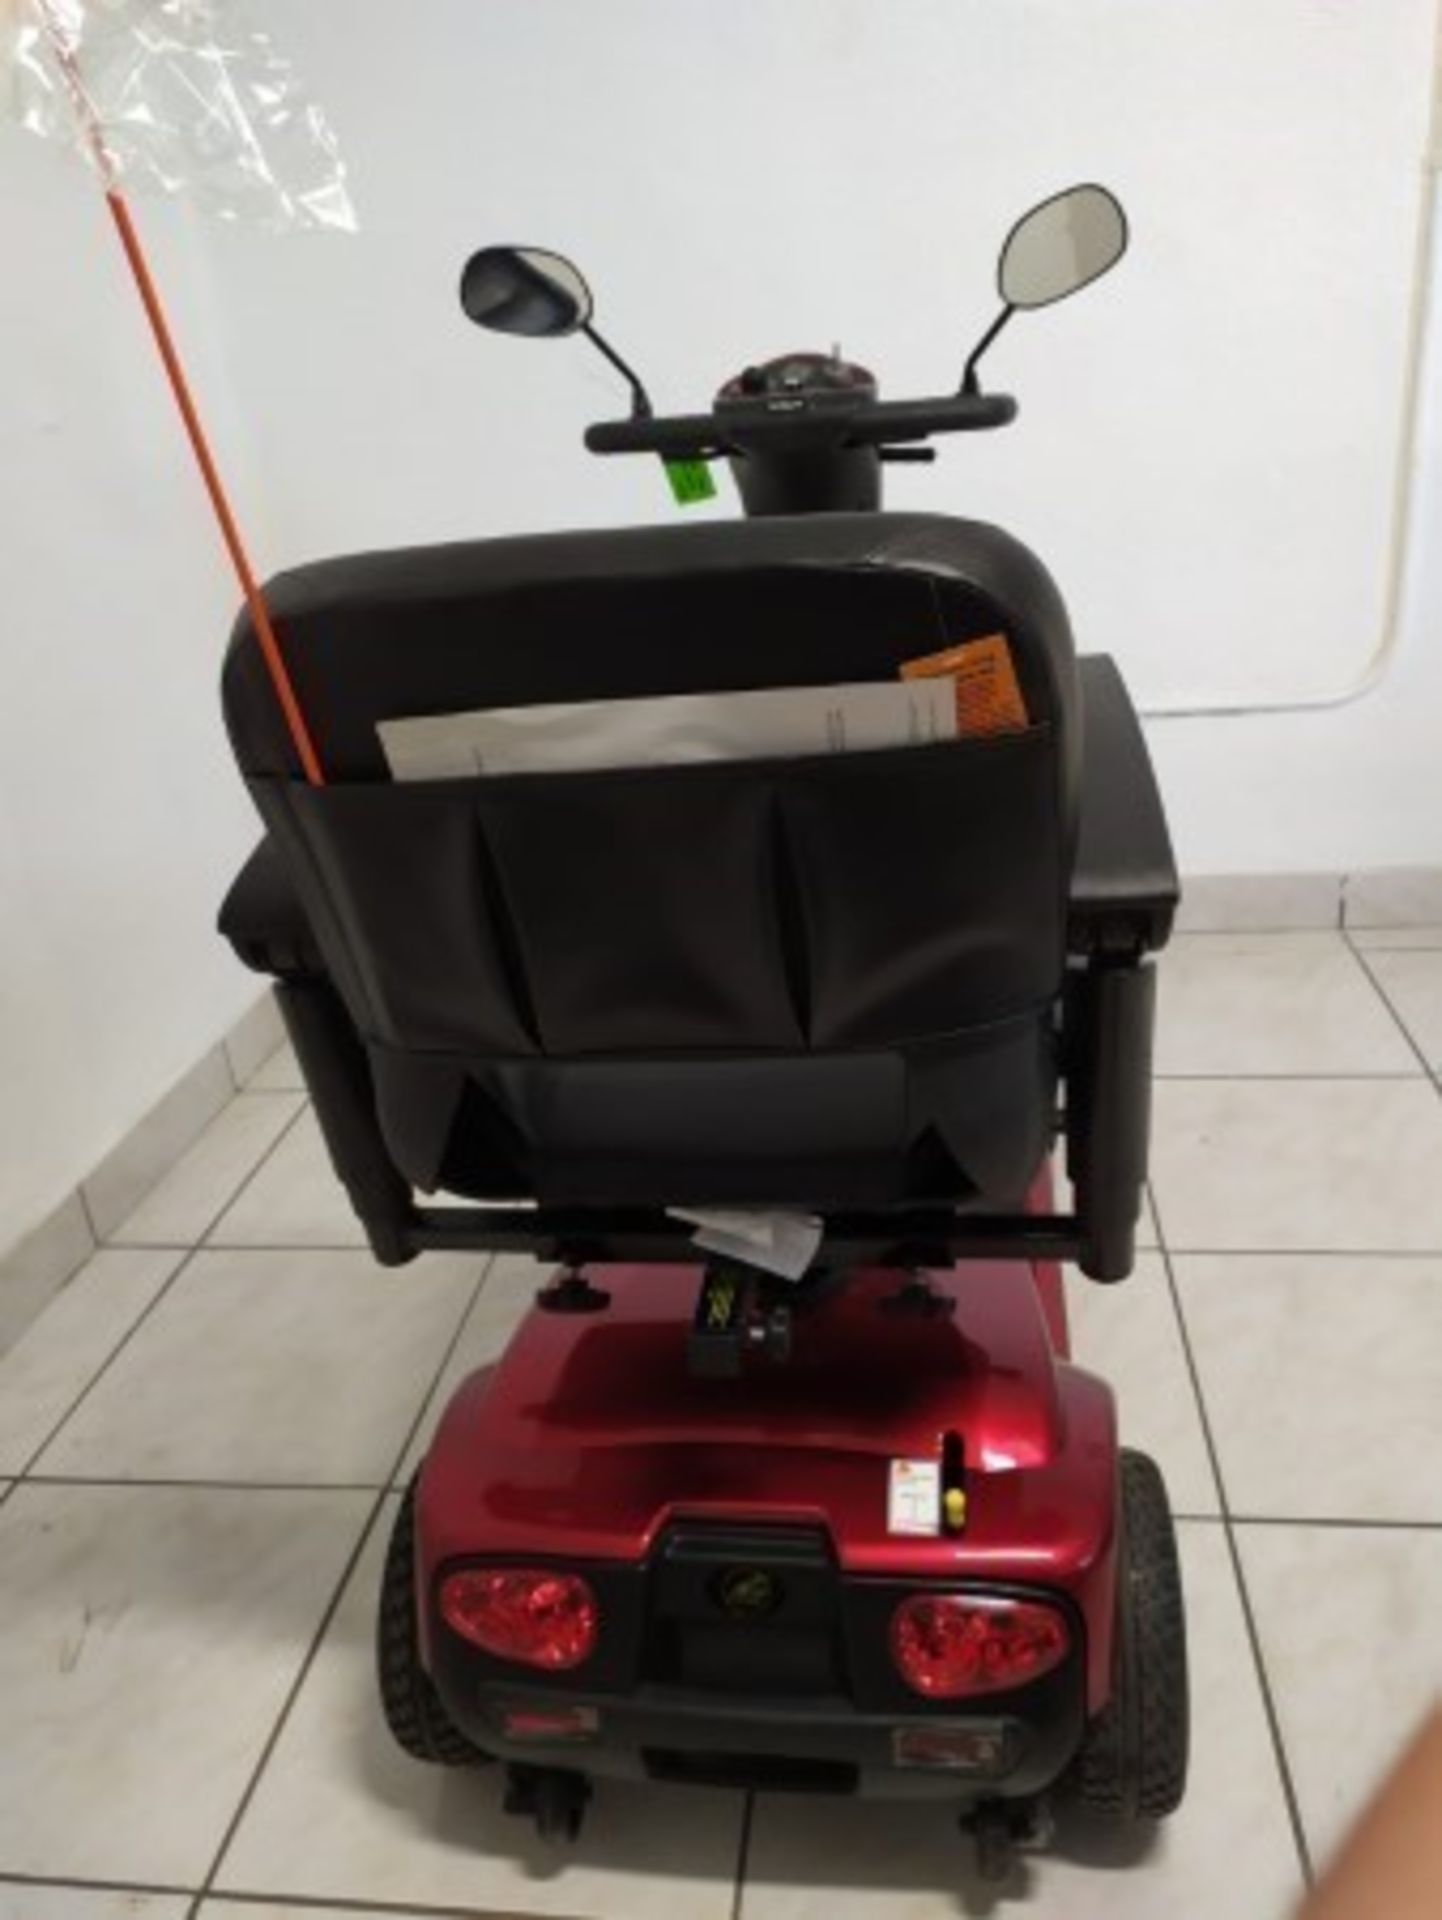 2017 GOLDEN COMPANION GC440 4-WHEEL SCOOTER WITH CHARGER, BASKET & COVER - RED - 400LB CAPACITY - SE - Image 3 of 6